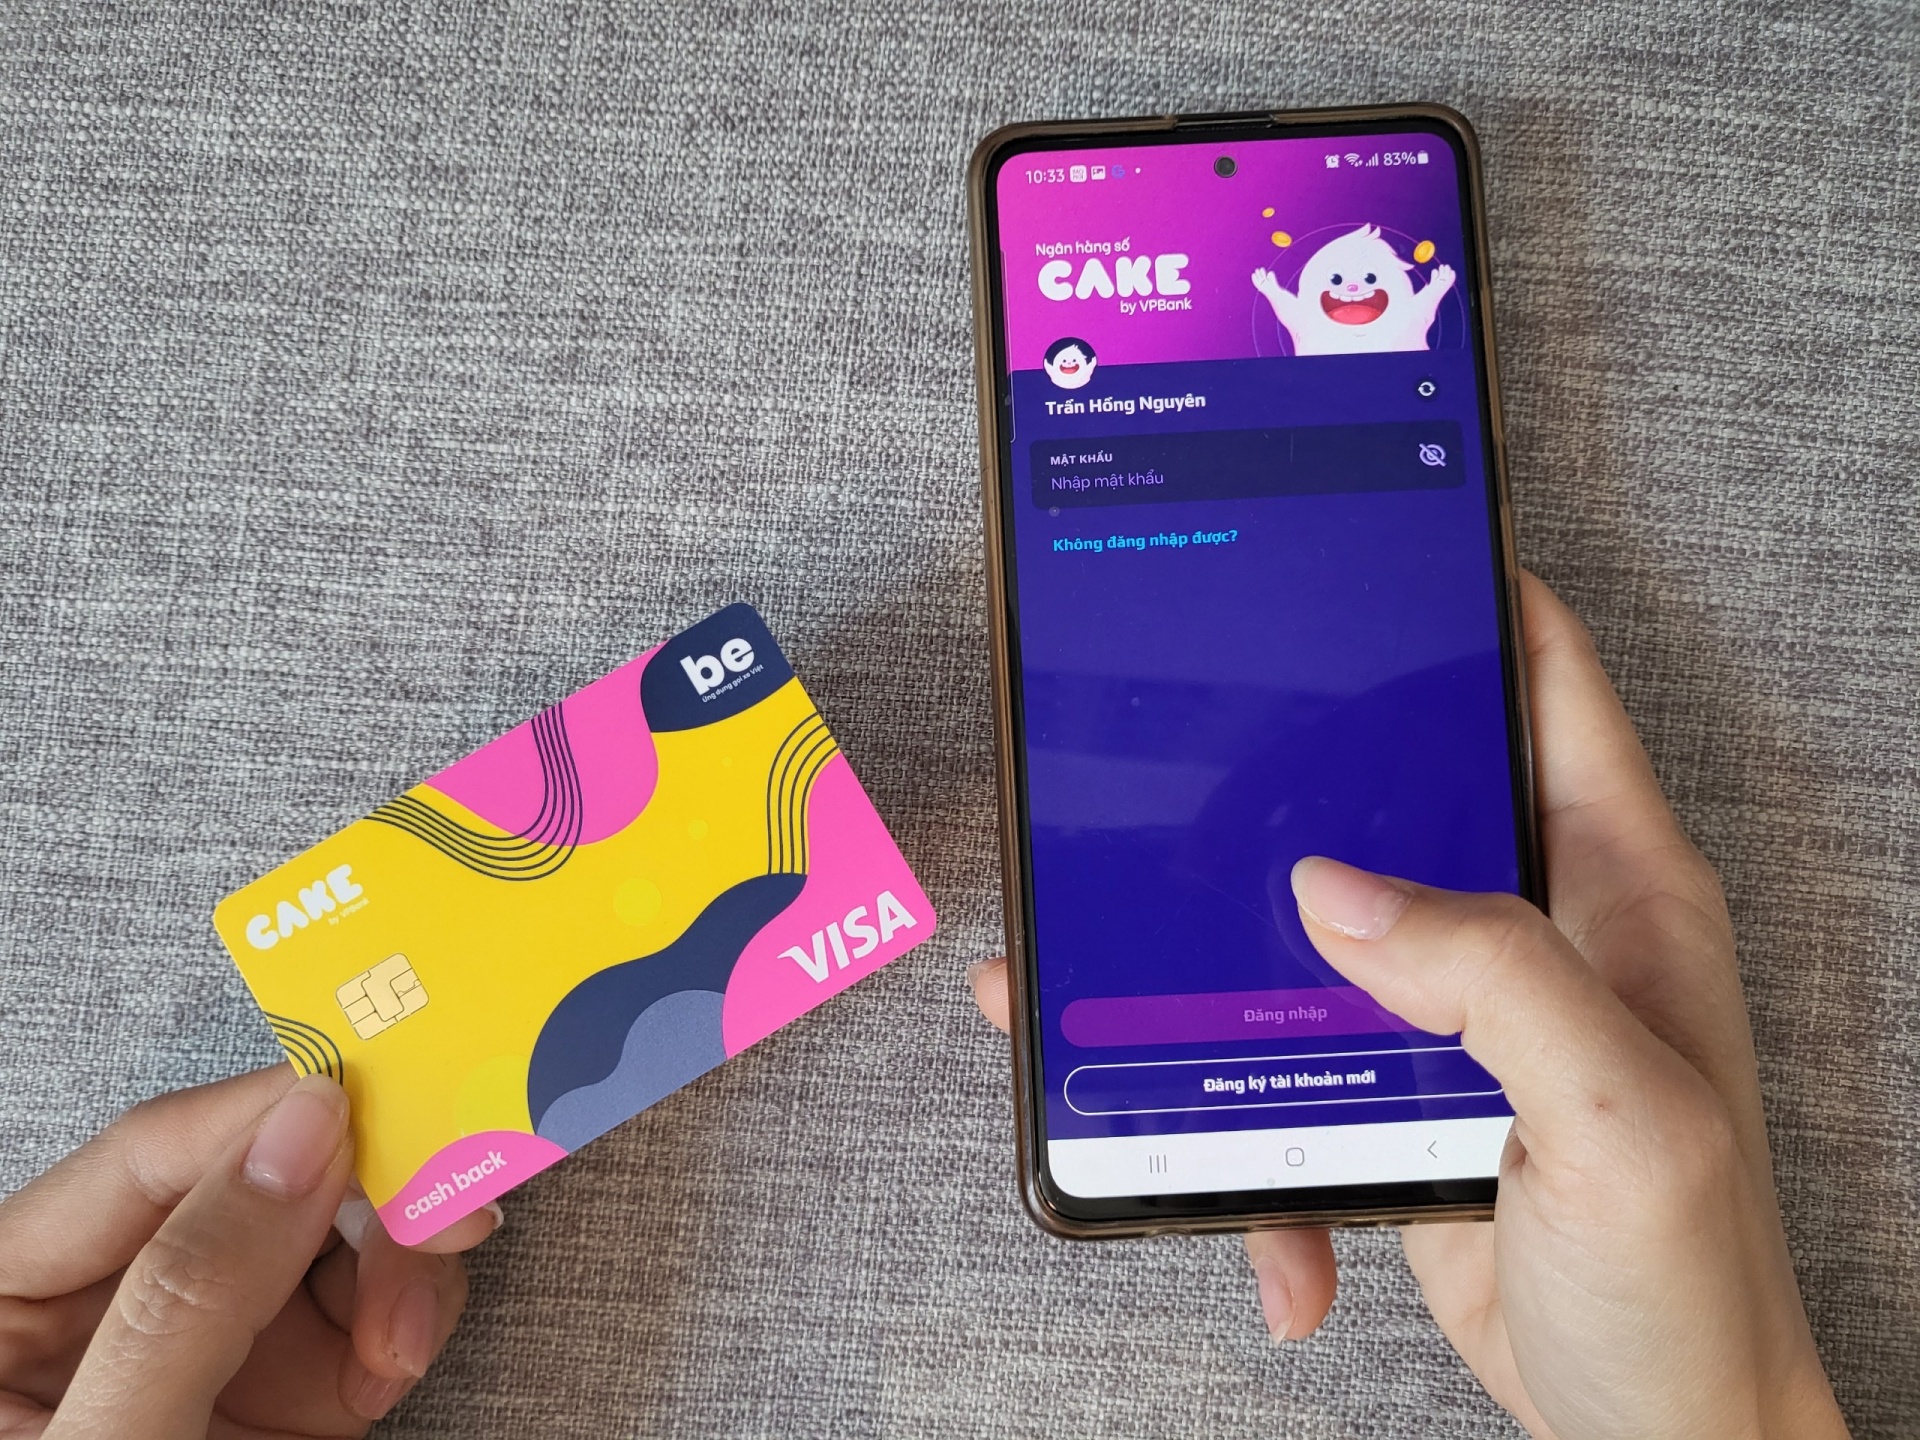 Be-Cake Visa credit card launched to enhance digital payment experience